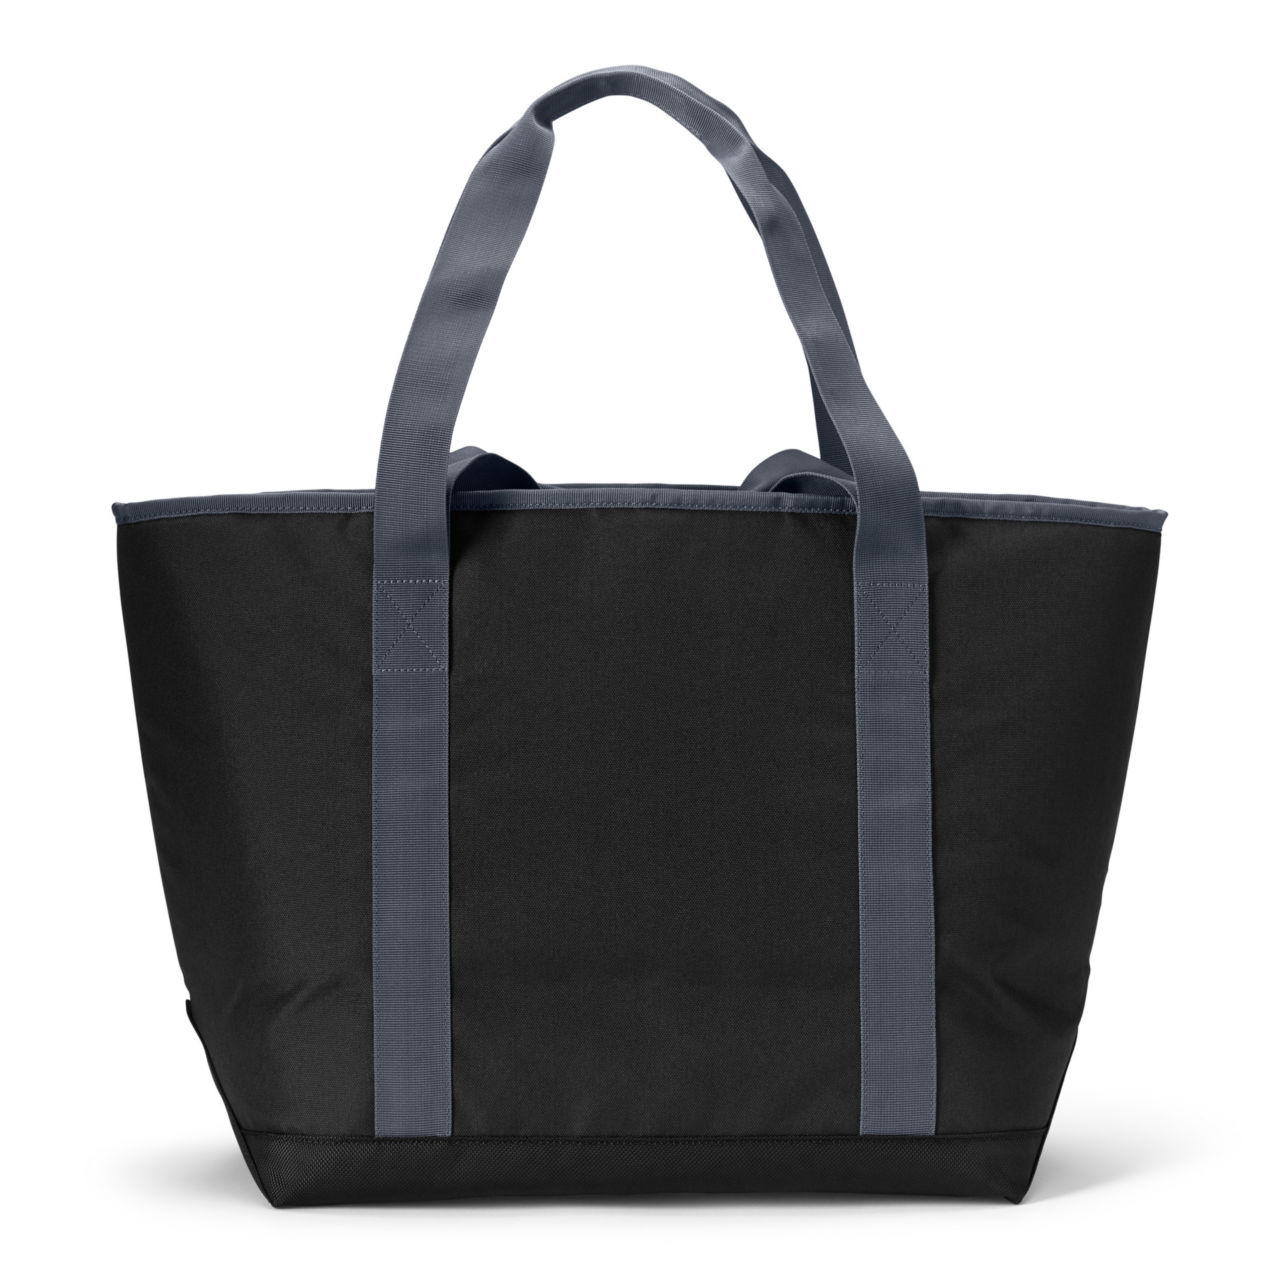 Orvis Insulated Adventure Tote - BLACK image number 2